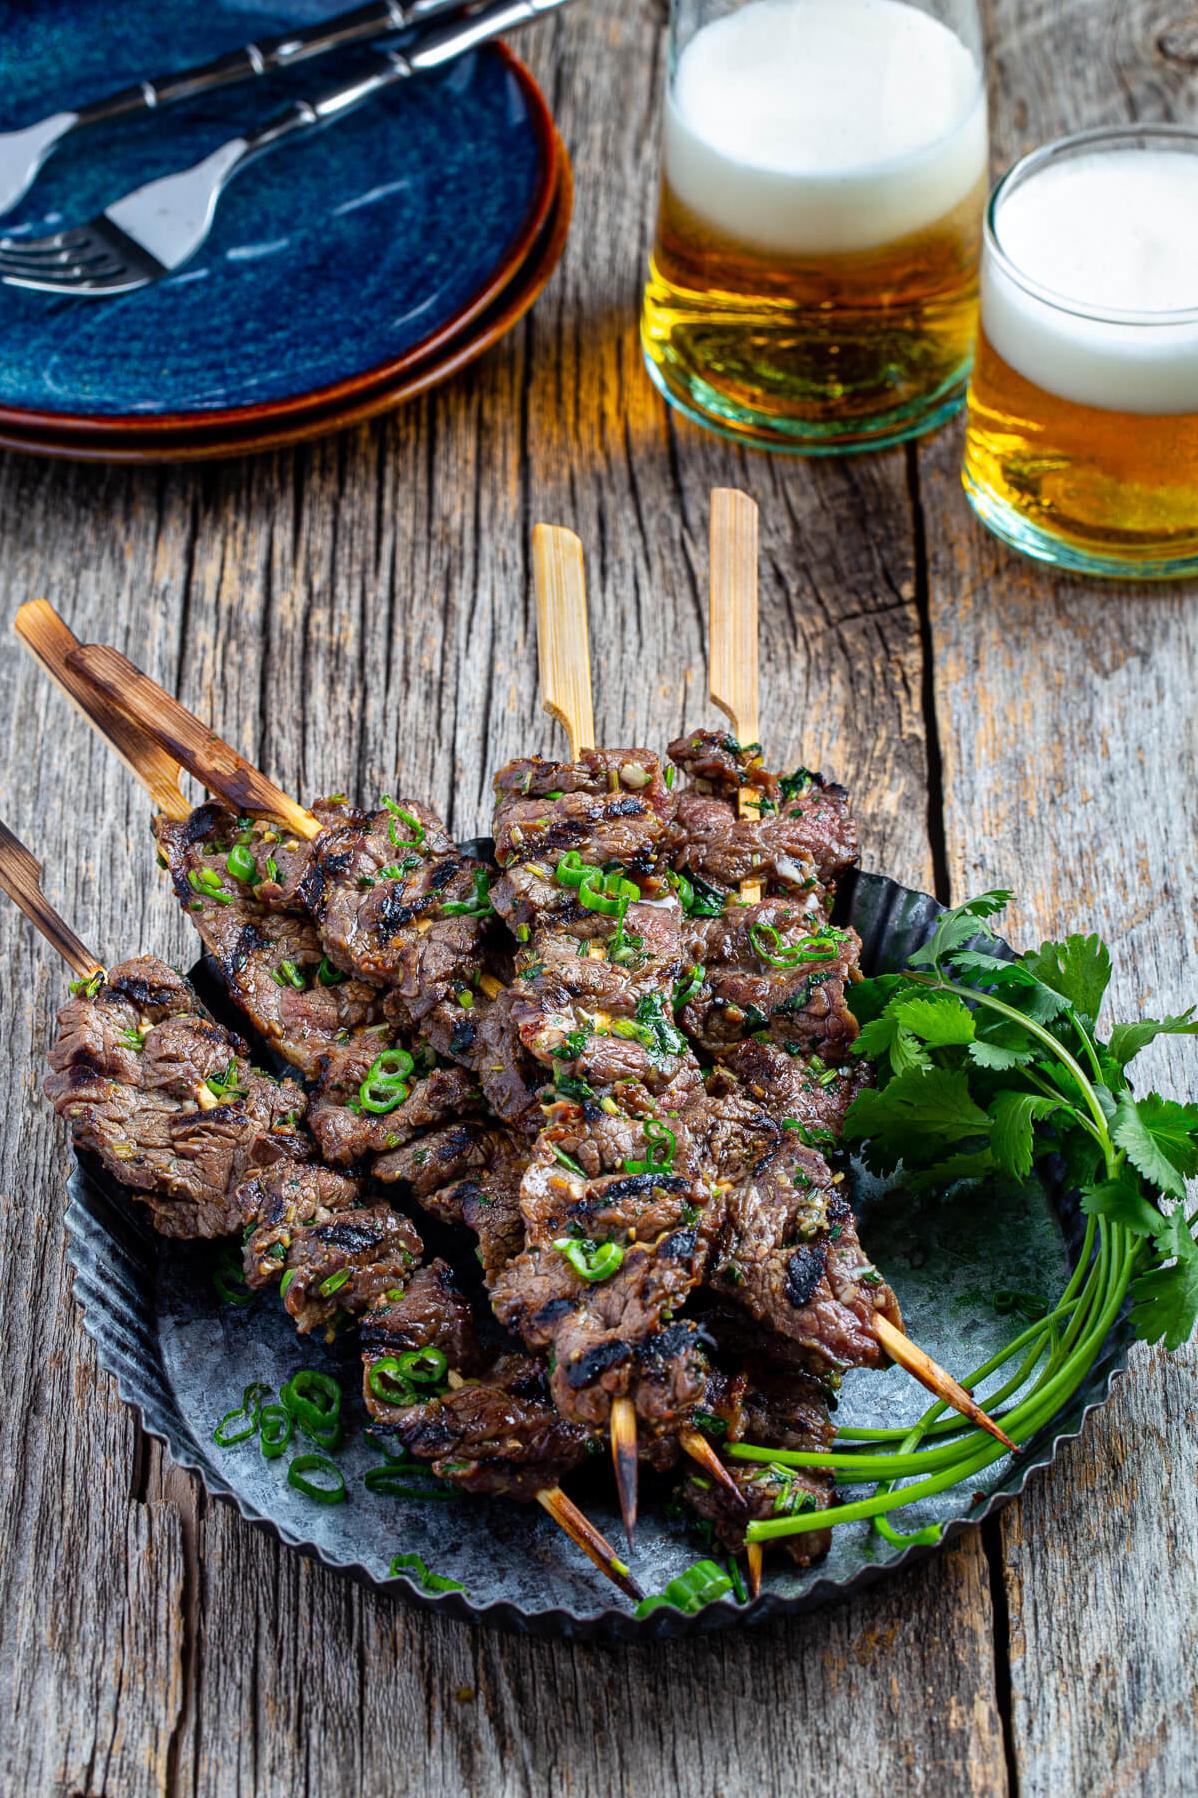  Fire up the grill and get ready to impress with these Vietnamese beef skewers.